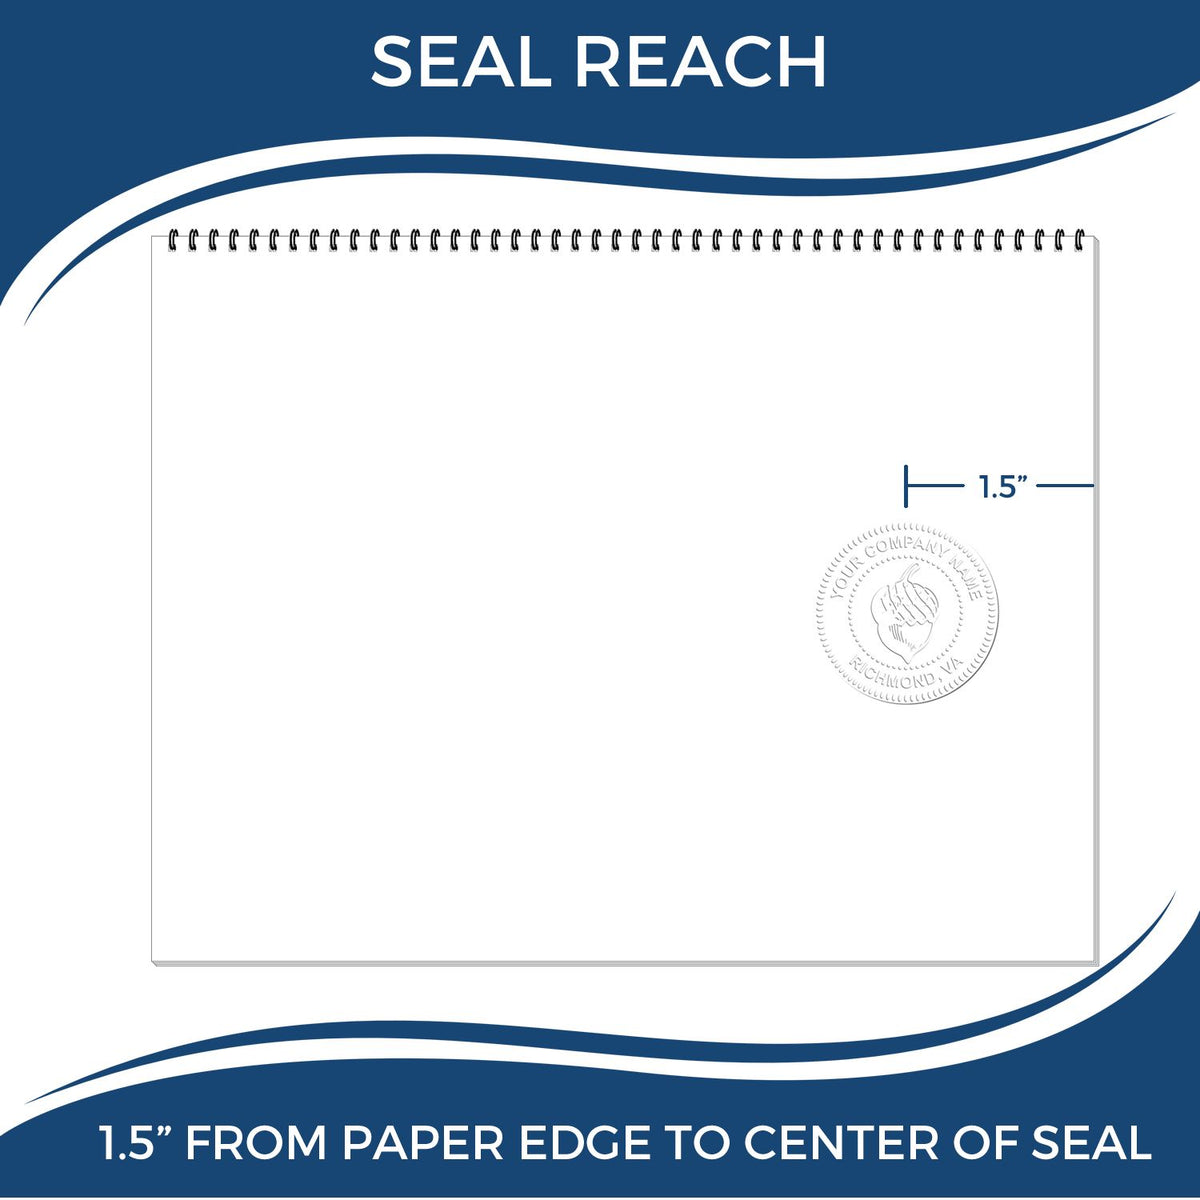 An infographic showing the seal reach which is represented by a ruler and a miniature seal image of the Handheld Washington Architect Seal Embosser